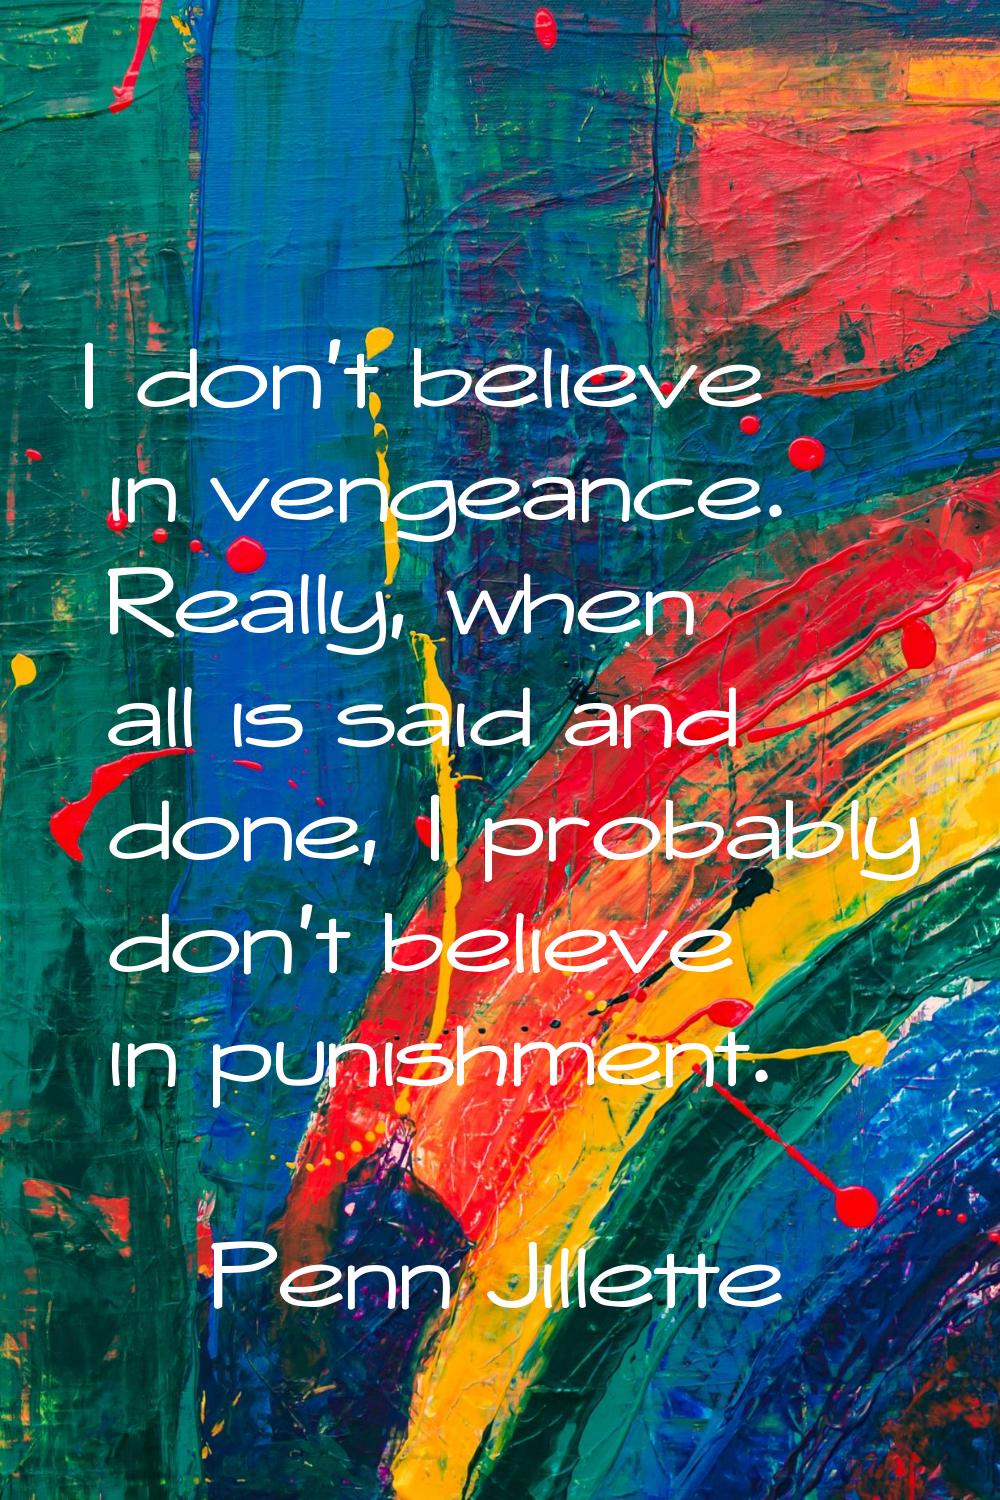 I don't believe in vengeance. Really, when all is said and done, I probably don't believe in punish